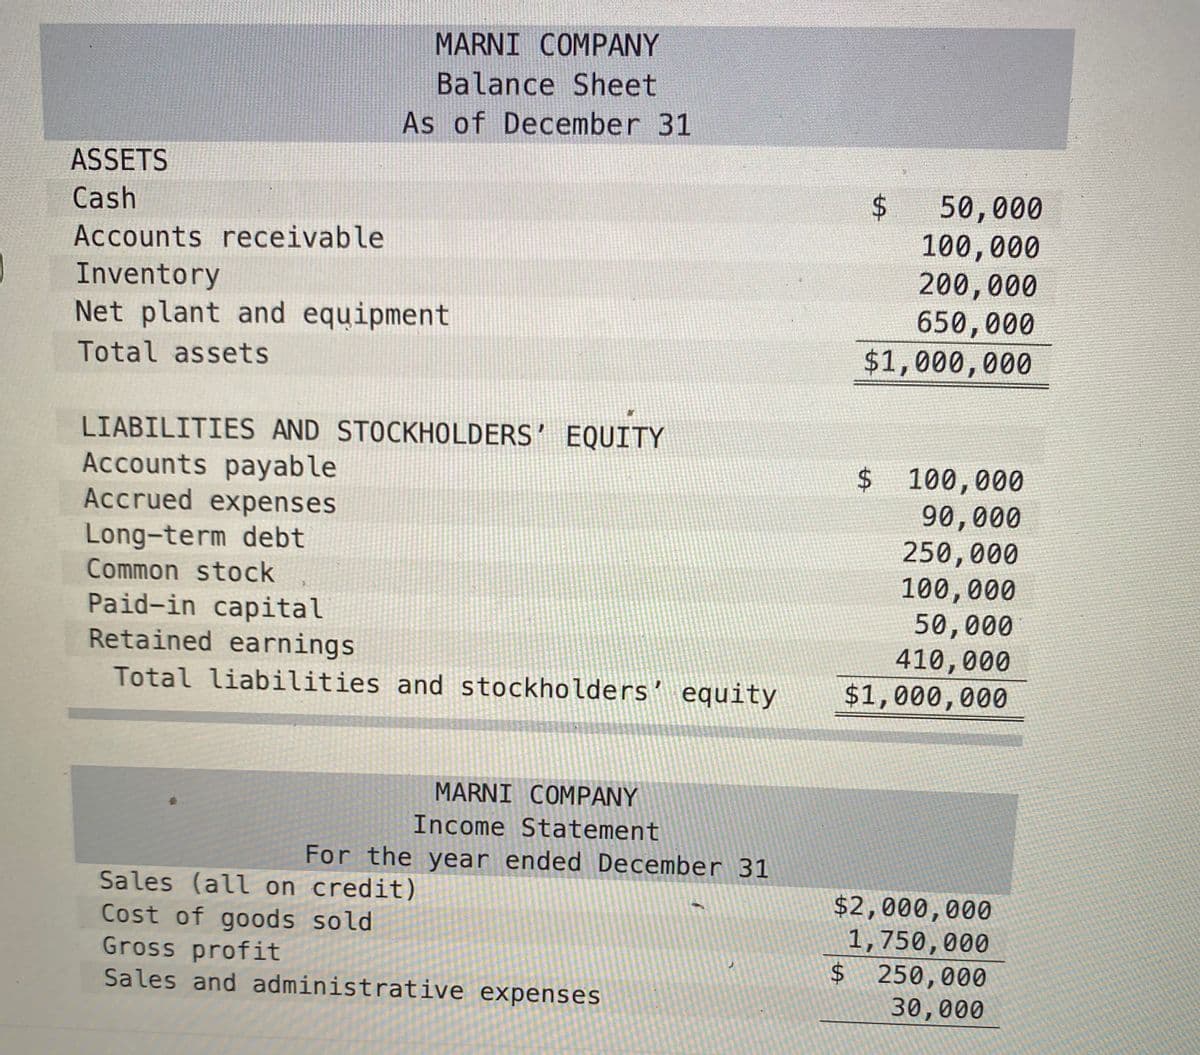 MARNI COMPANY
Balance Sheet
As of December 31
ASSETS
50,000
100,000
200,000
650,000
$1,000,000
Cash
Accounts receivable
Inventory
Net plant and equipment
Total assets
LIABILITIES AND STOCKHOLDERS’ EQUITY
Accounts payable
Accrued expenses
$ 100,000
90,000
250,000
100,000
50,000
410,000
$1,000,000
Long-term debt
Common stock
Paid-in capital
Retained earnings
Total liabilities and stockholders' equity
MARNI COMPANY
Income Statement
For the year ended December 31
Sales (all on credit)
Cost of goods sold
Gross profit
Sales and administrative expenses
$2,000,000
1,750,000
$250,000
30,000
%24
